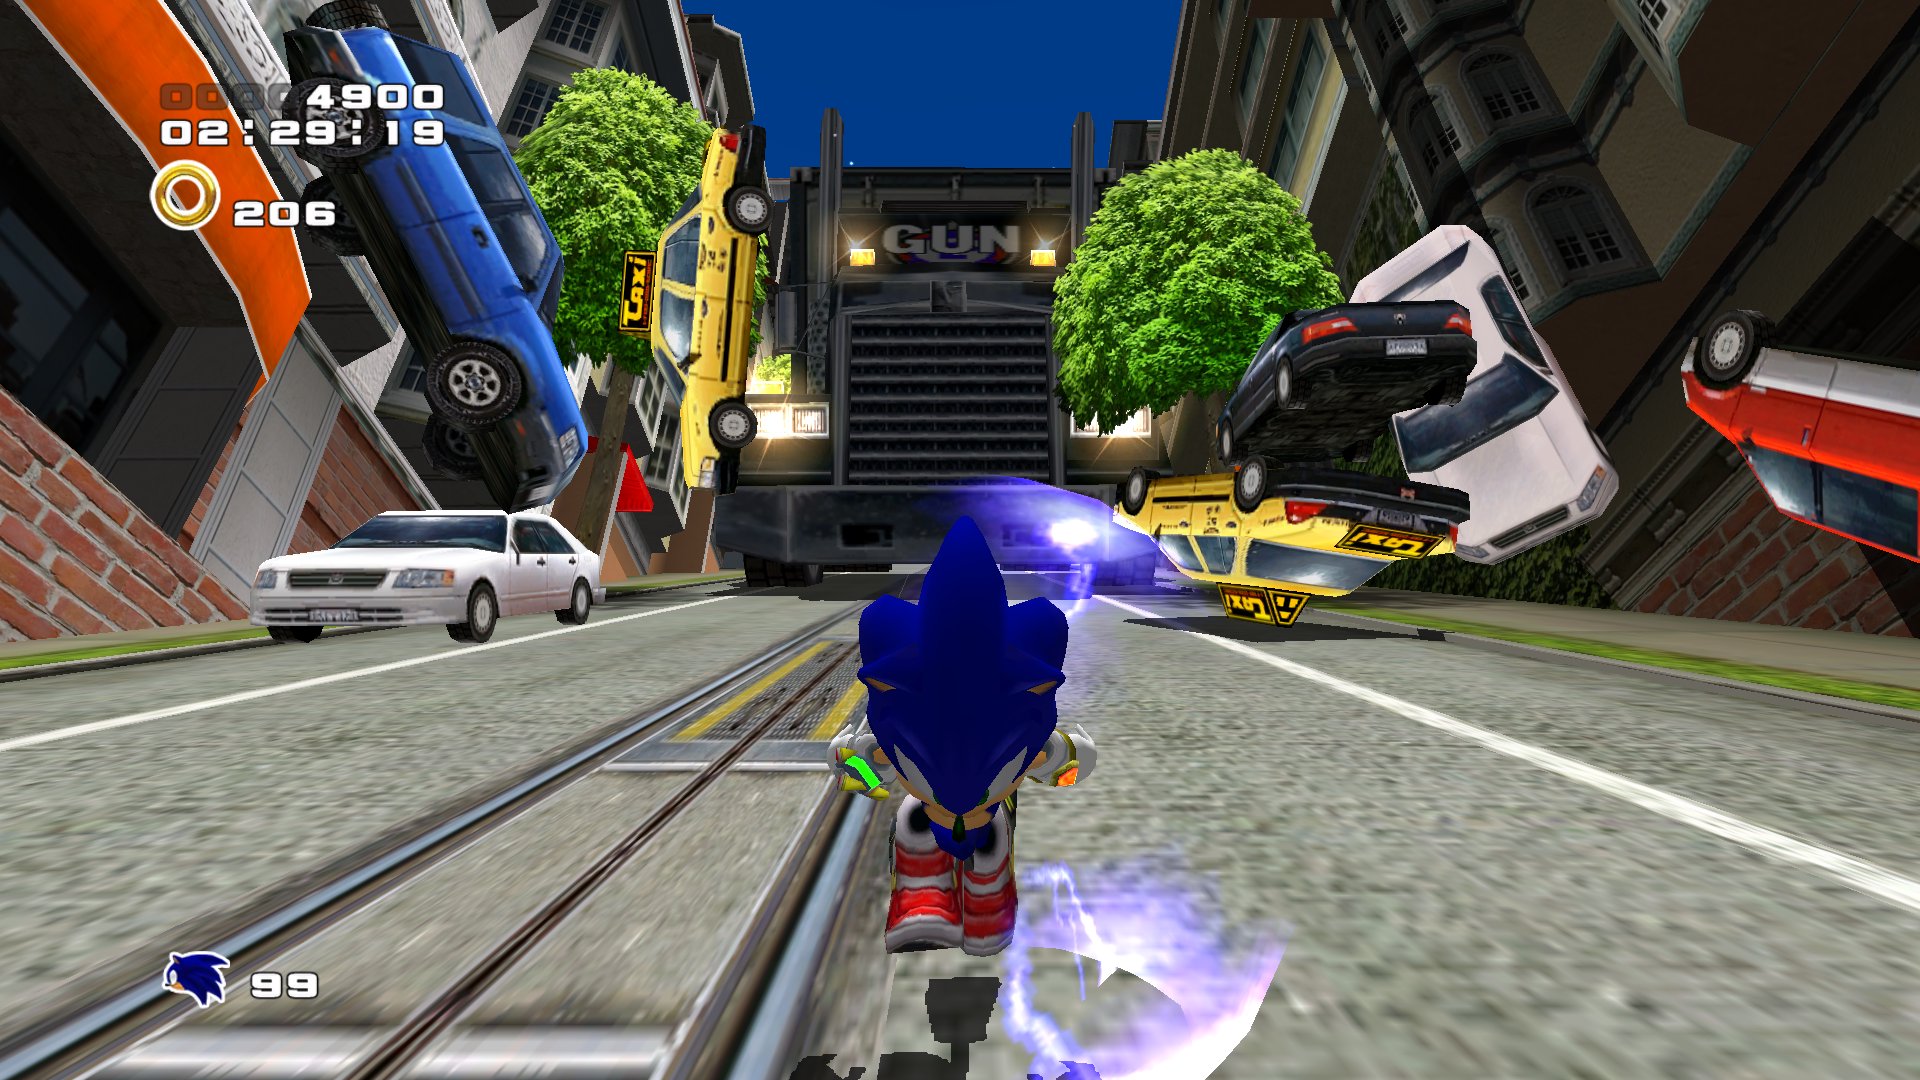 SEGA: Sonic Frontiers To Be As Impactful As Adventure, Targeting High  Review Scores, & More! 